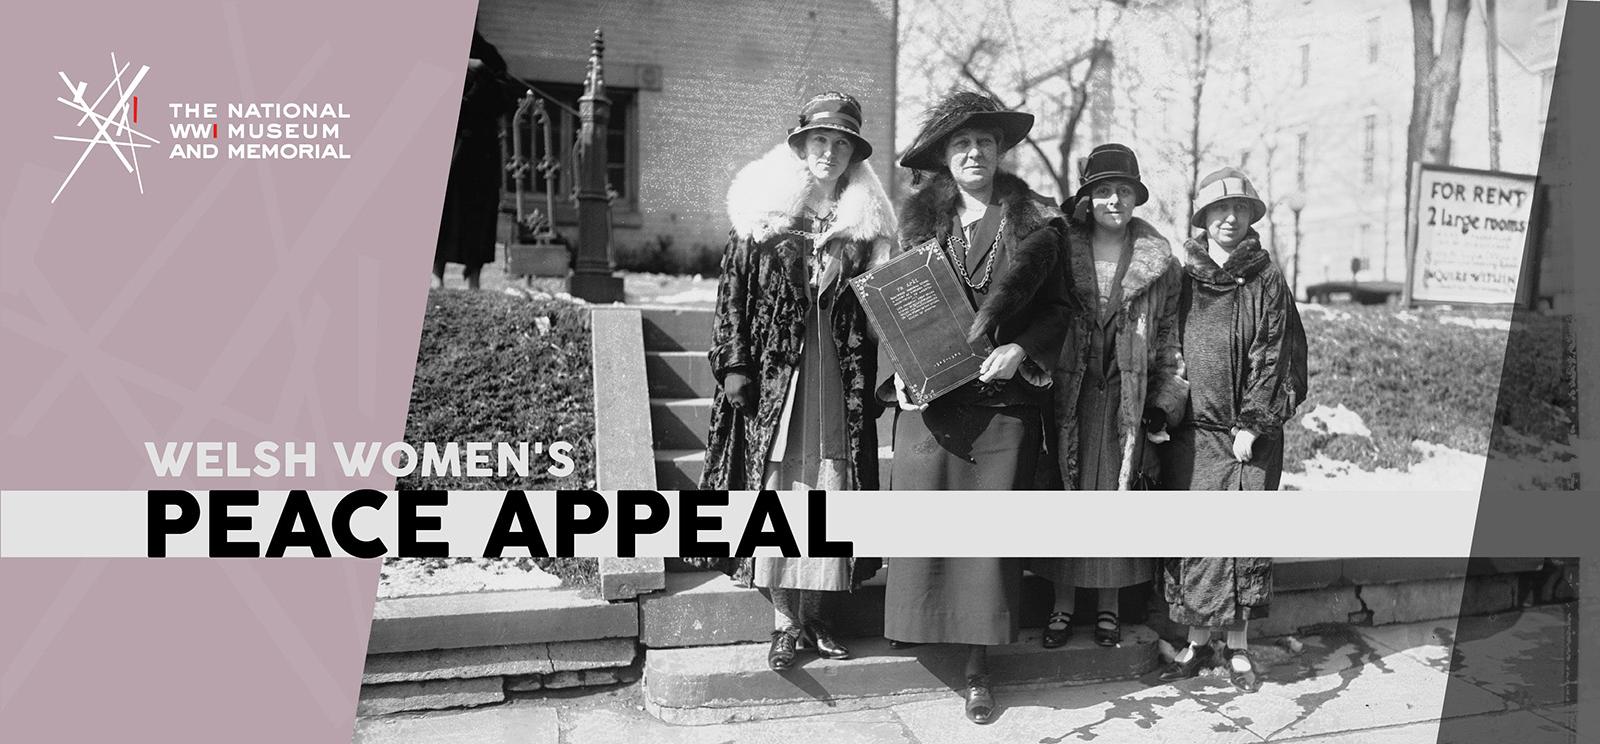 Image: Black and white photograph of four white women standing on some stone steps outside a residential building looking at the viewer. They are dressed warmly in 1920s traveling clothes and hats. One of the women is holding a large portfolio. Text: 'Welsh Women's Peace Appeal'